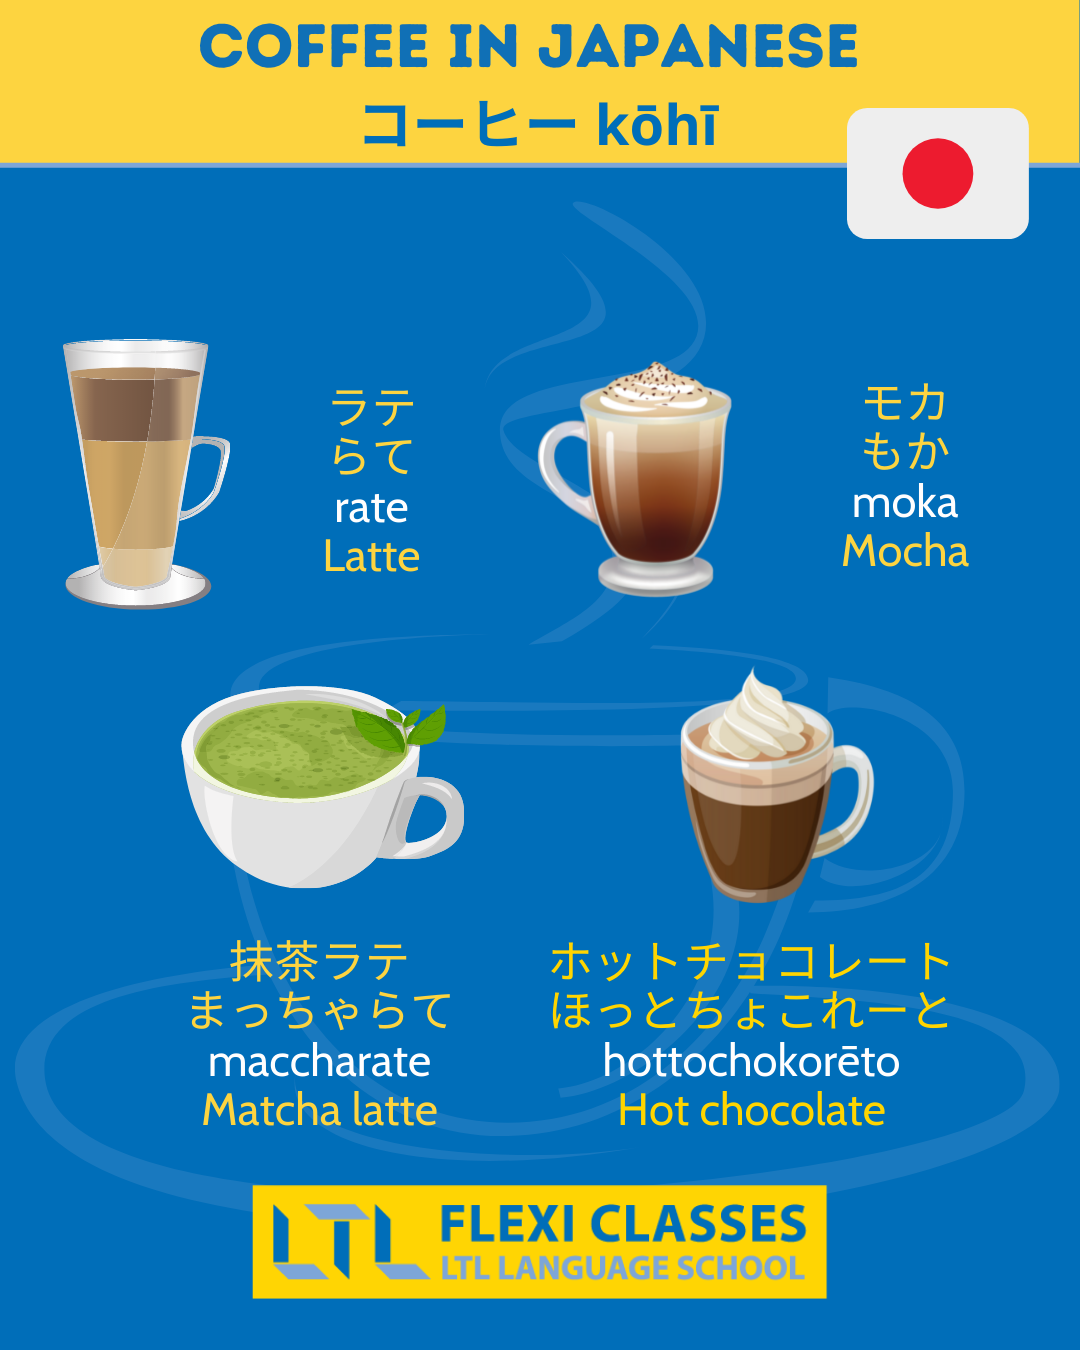 Coffee in Japanese